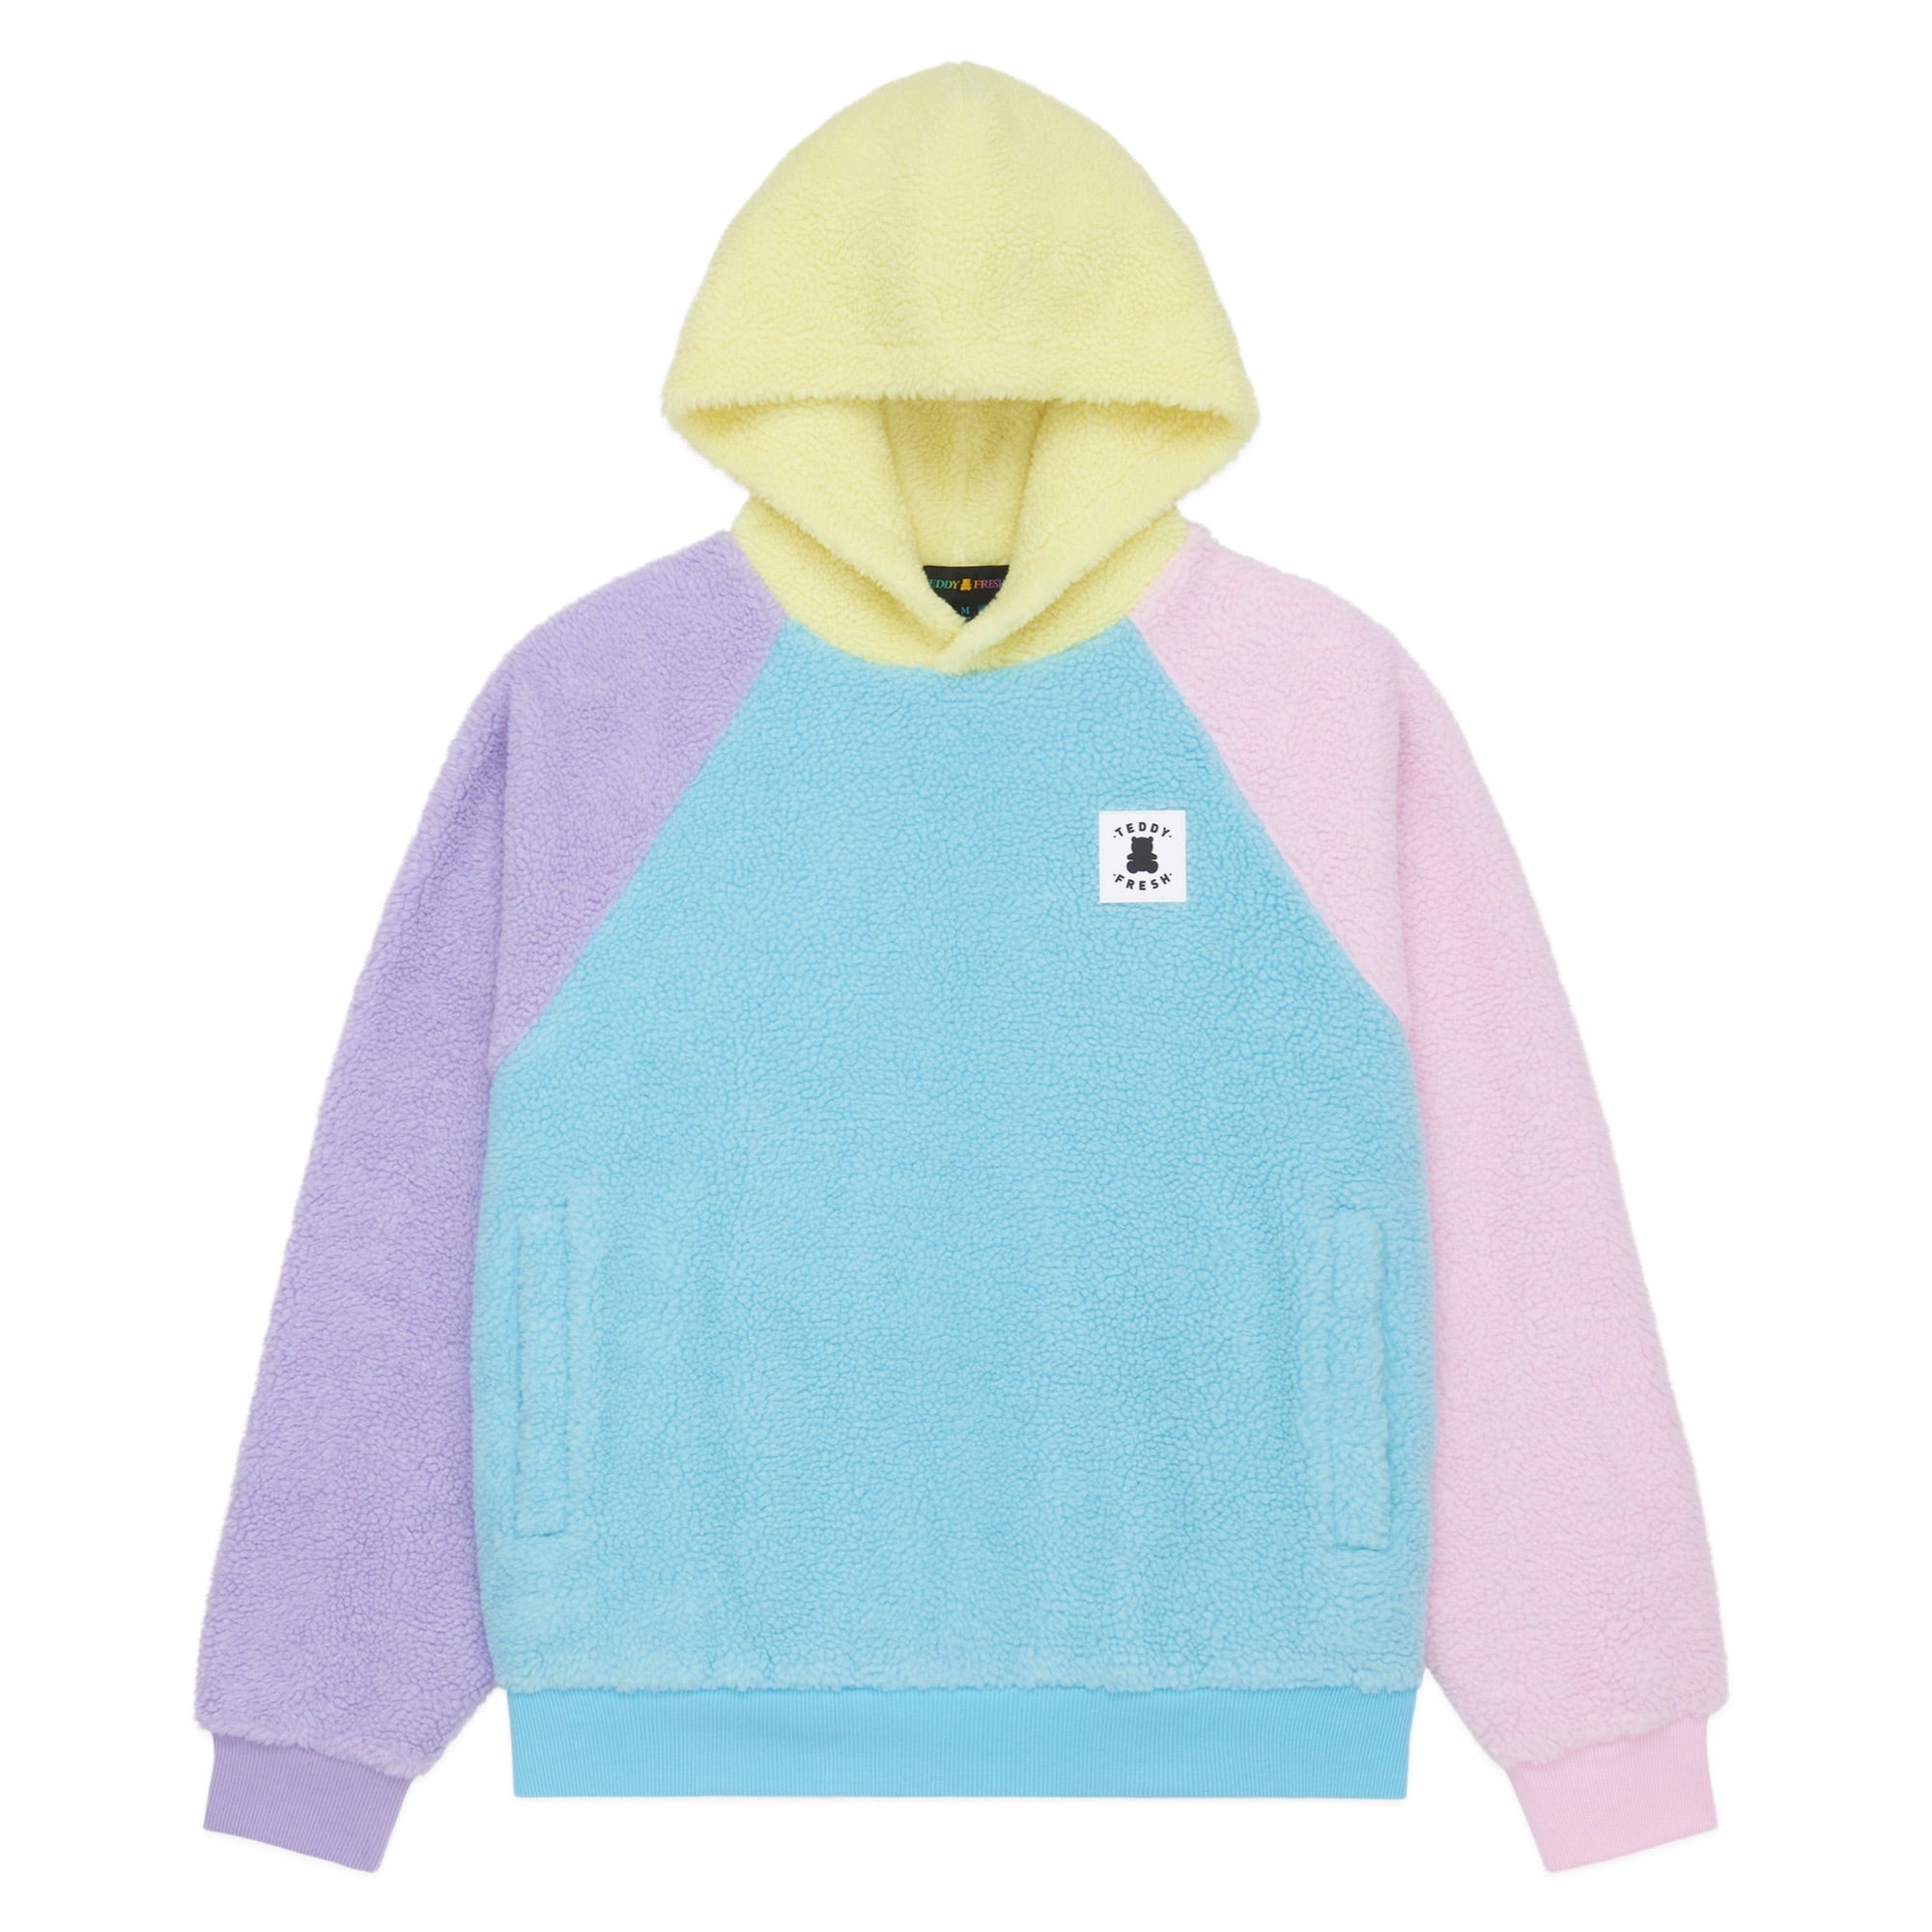 RBW Colorblock Hoodie FREE SHIPPING & RETURNS